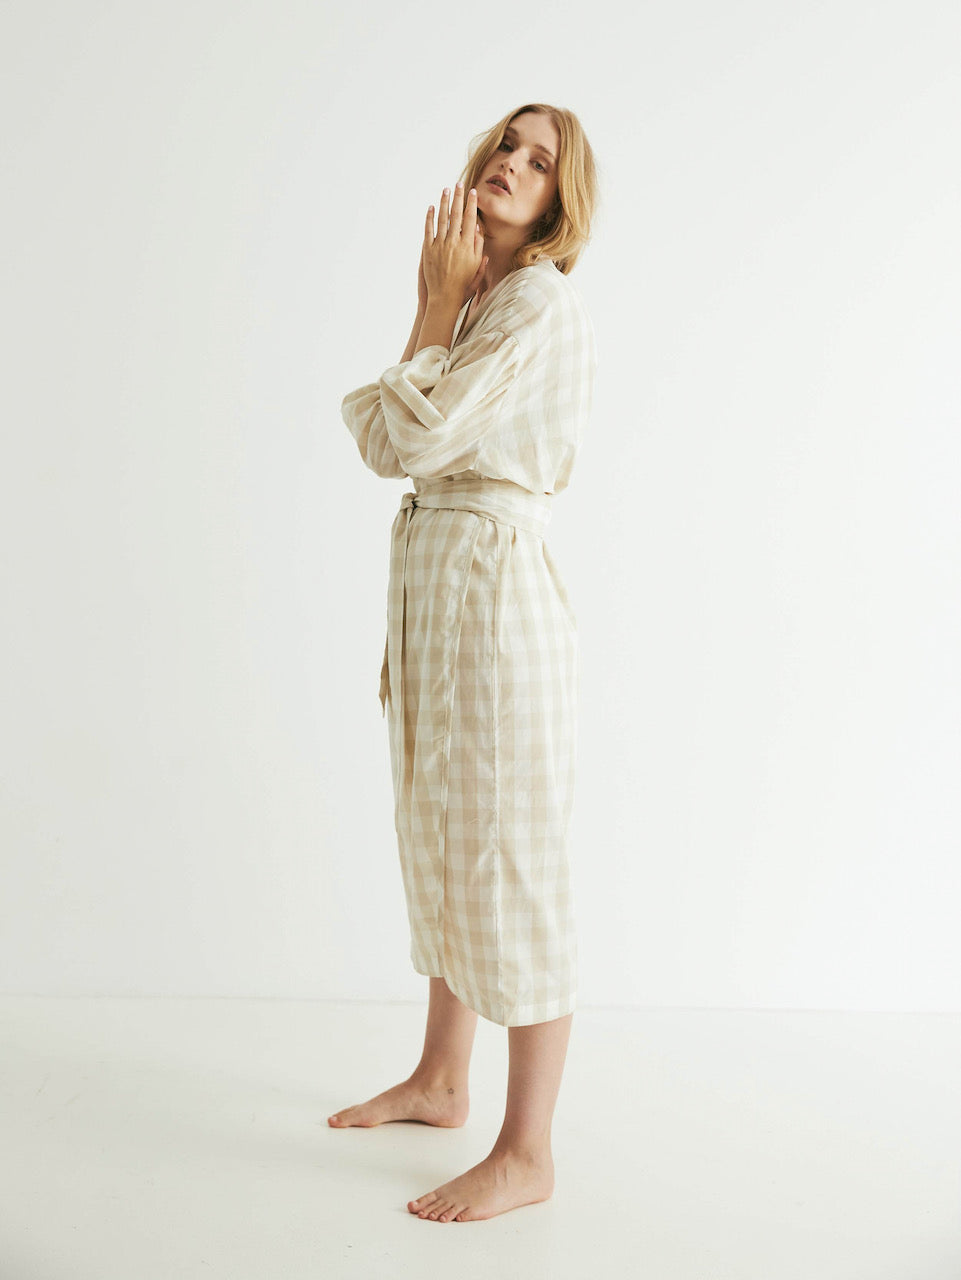 A person in a Agnes Wrap - Oatmeal Gingham robe stands barefoot with their hands gently touching their cheek and neck, epitomizing tranquility. (general sleep)